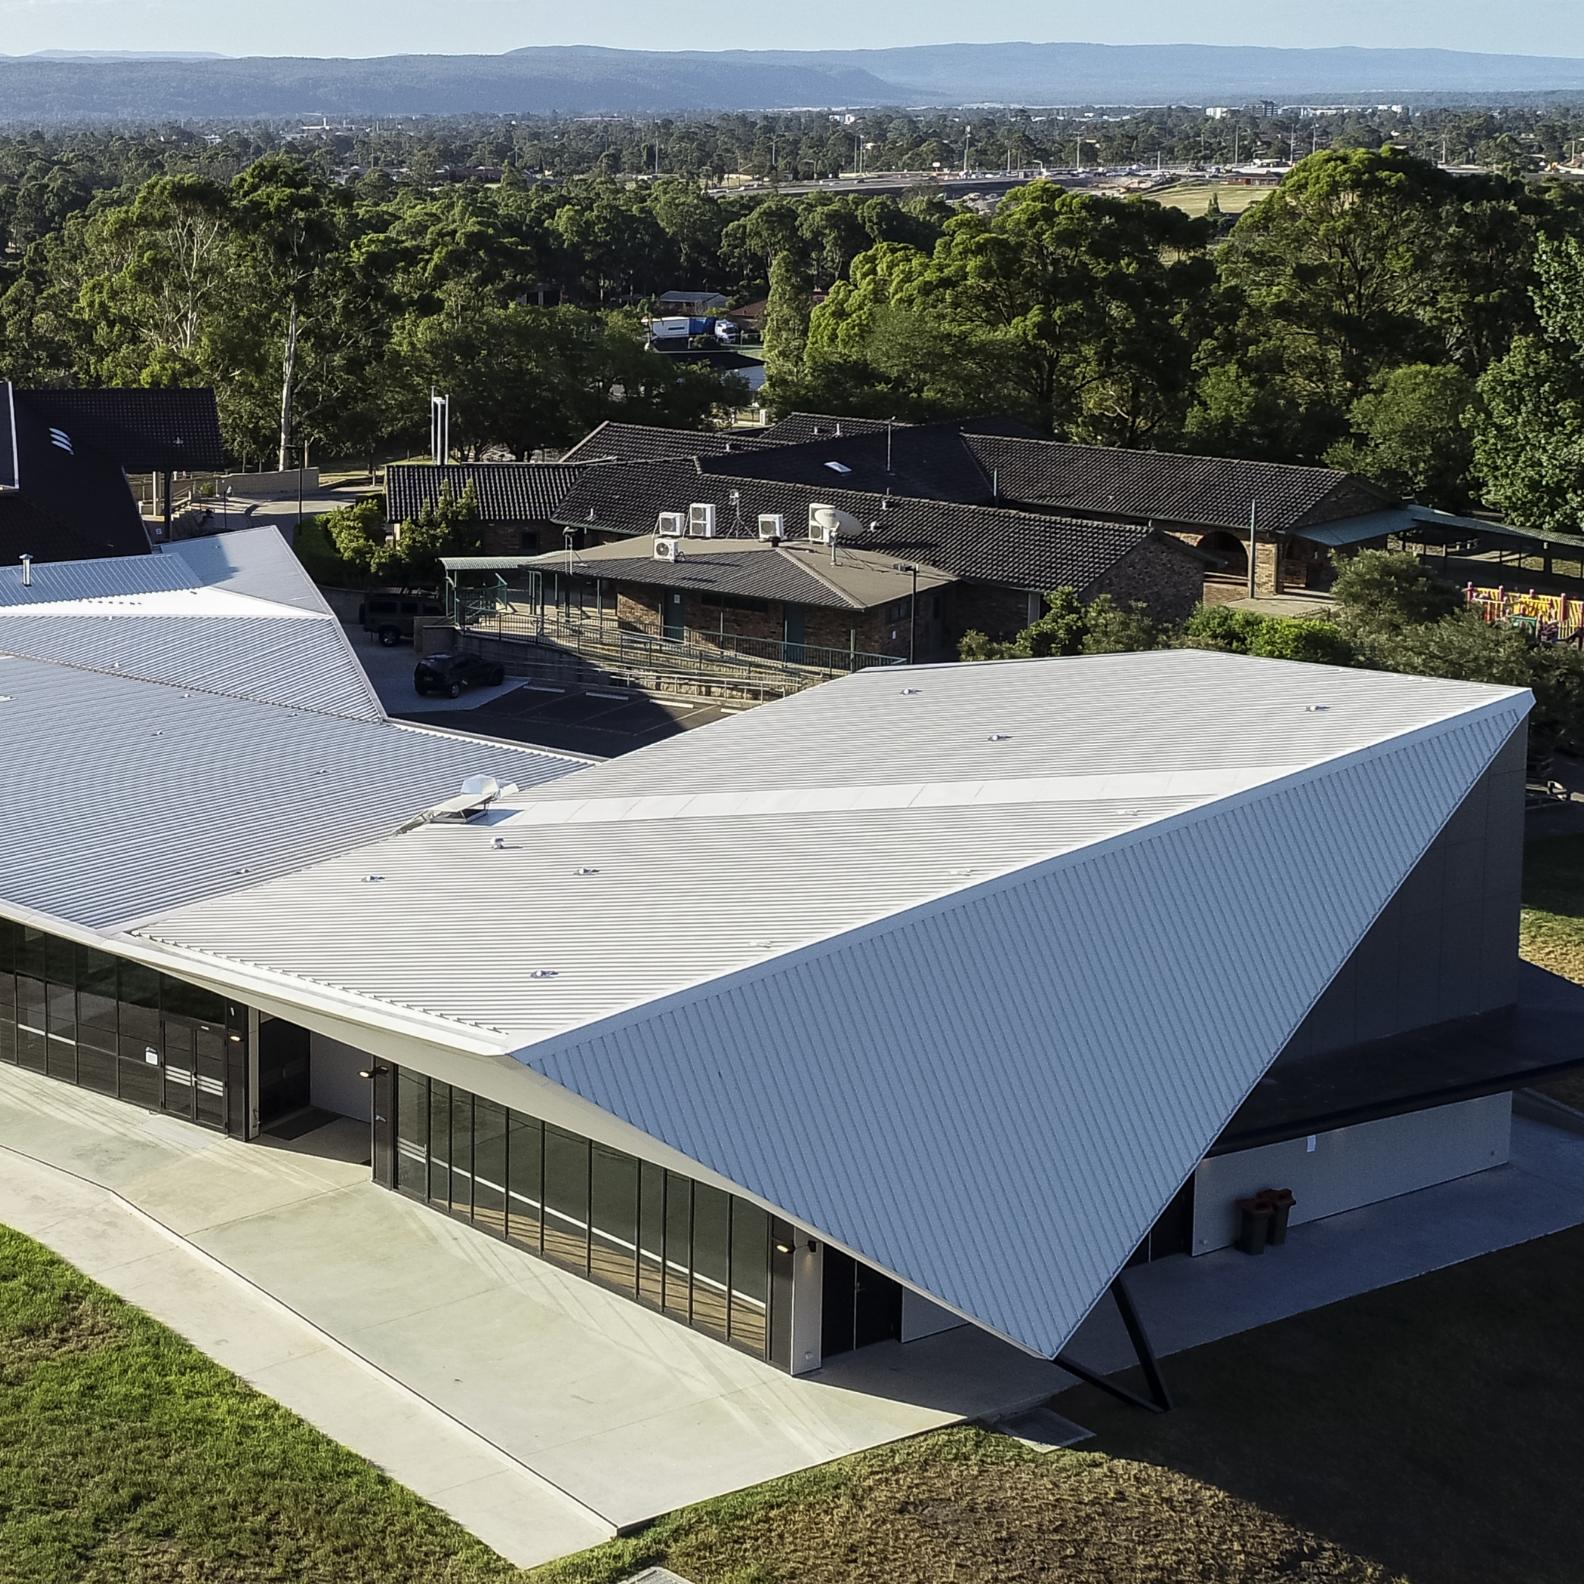 School with KLIP-LOK steel roofing manufactured from COLORBOND steel in colour Surfmist